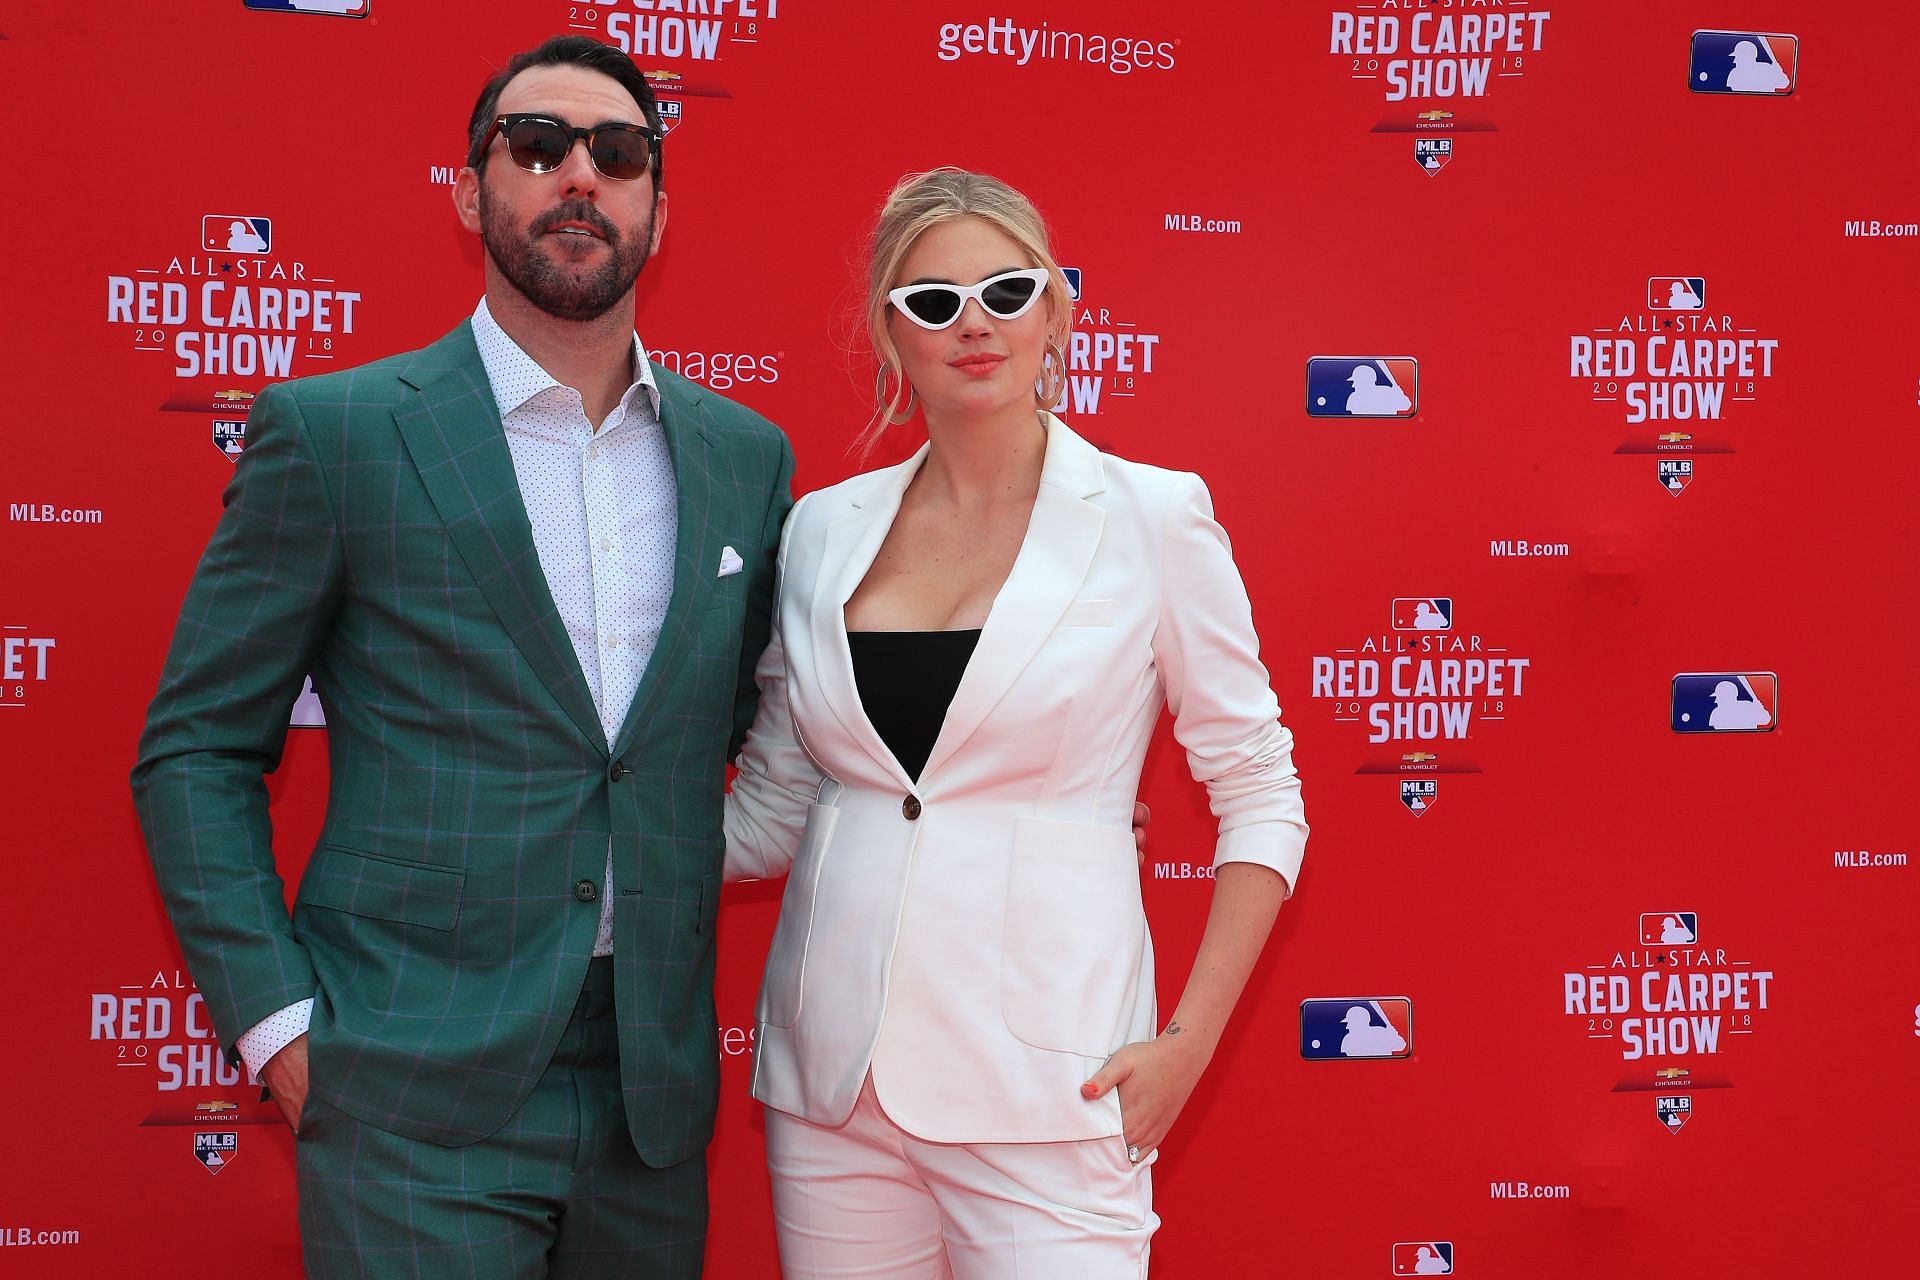 Verlander and Kate Upton at the 89th MLB All-Star game.